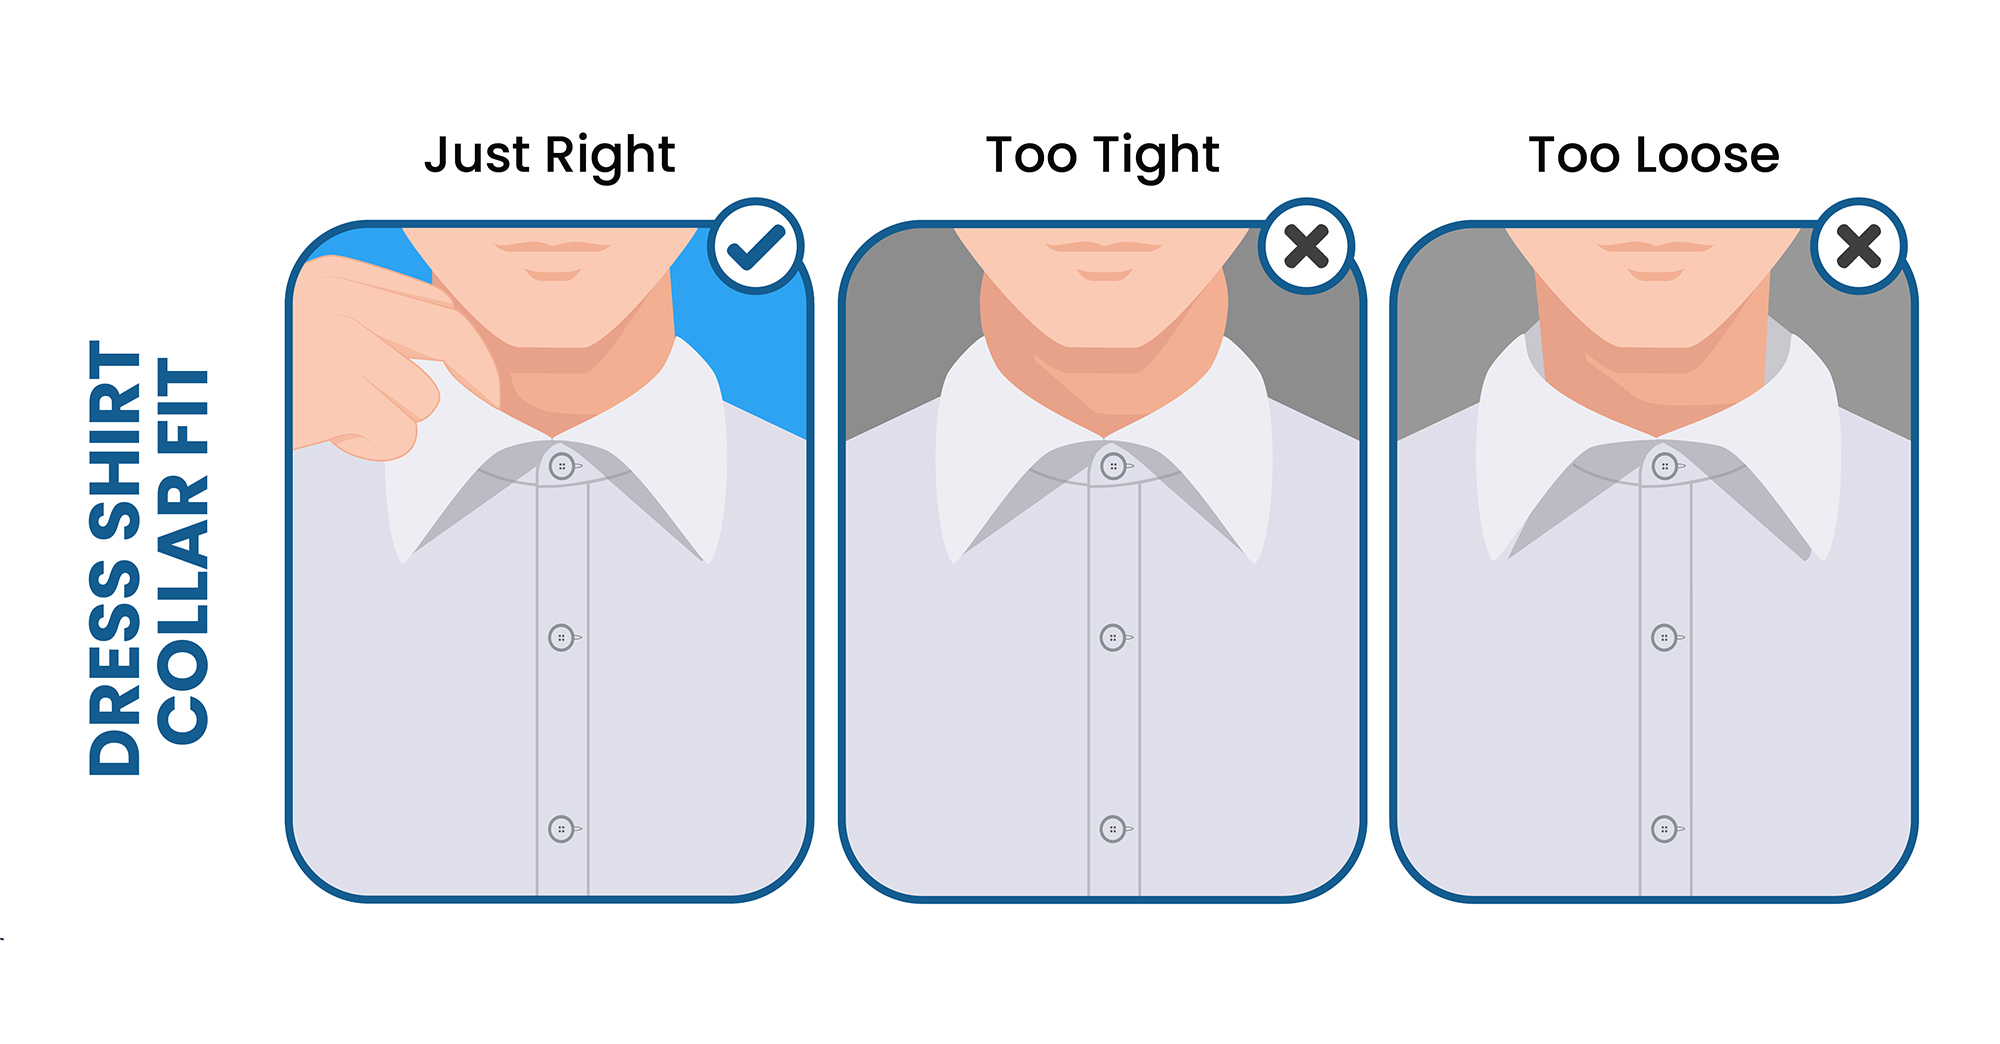 Men's dress shirt guide: with or without a pocket? Here's how to choose